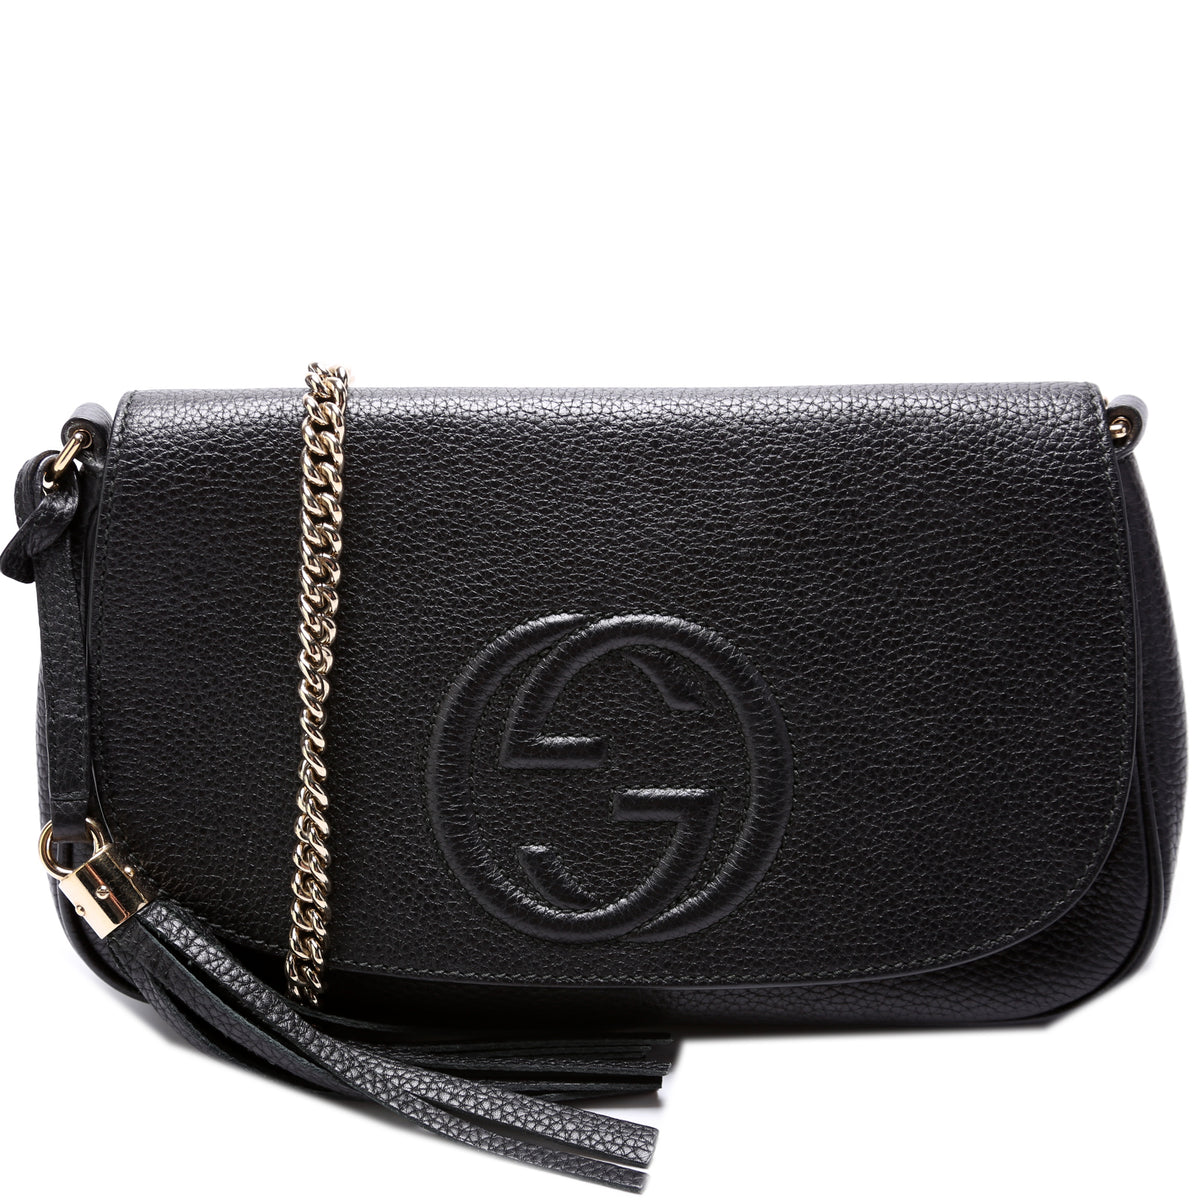 100% Authentic Gucci GG Soho on Chain Crossbody Shoulder Bag